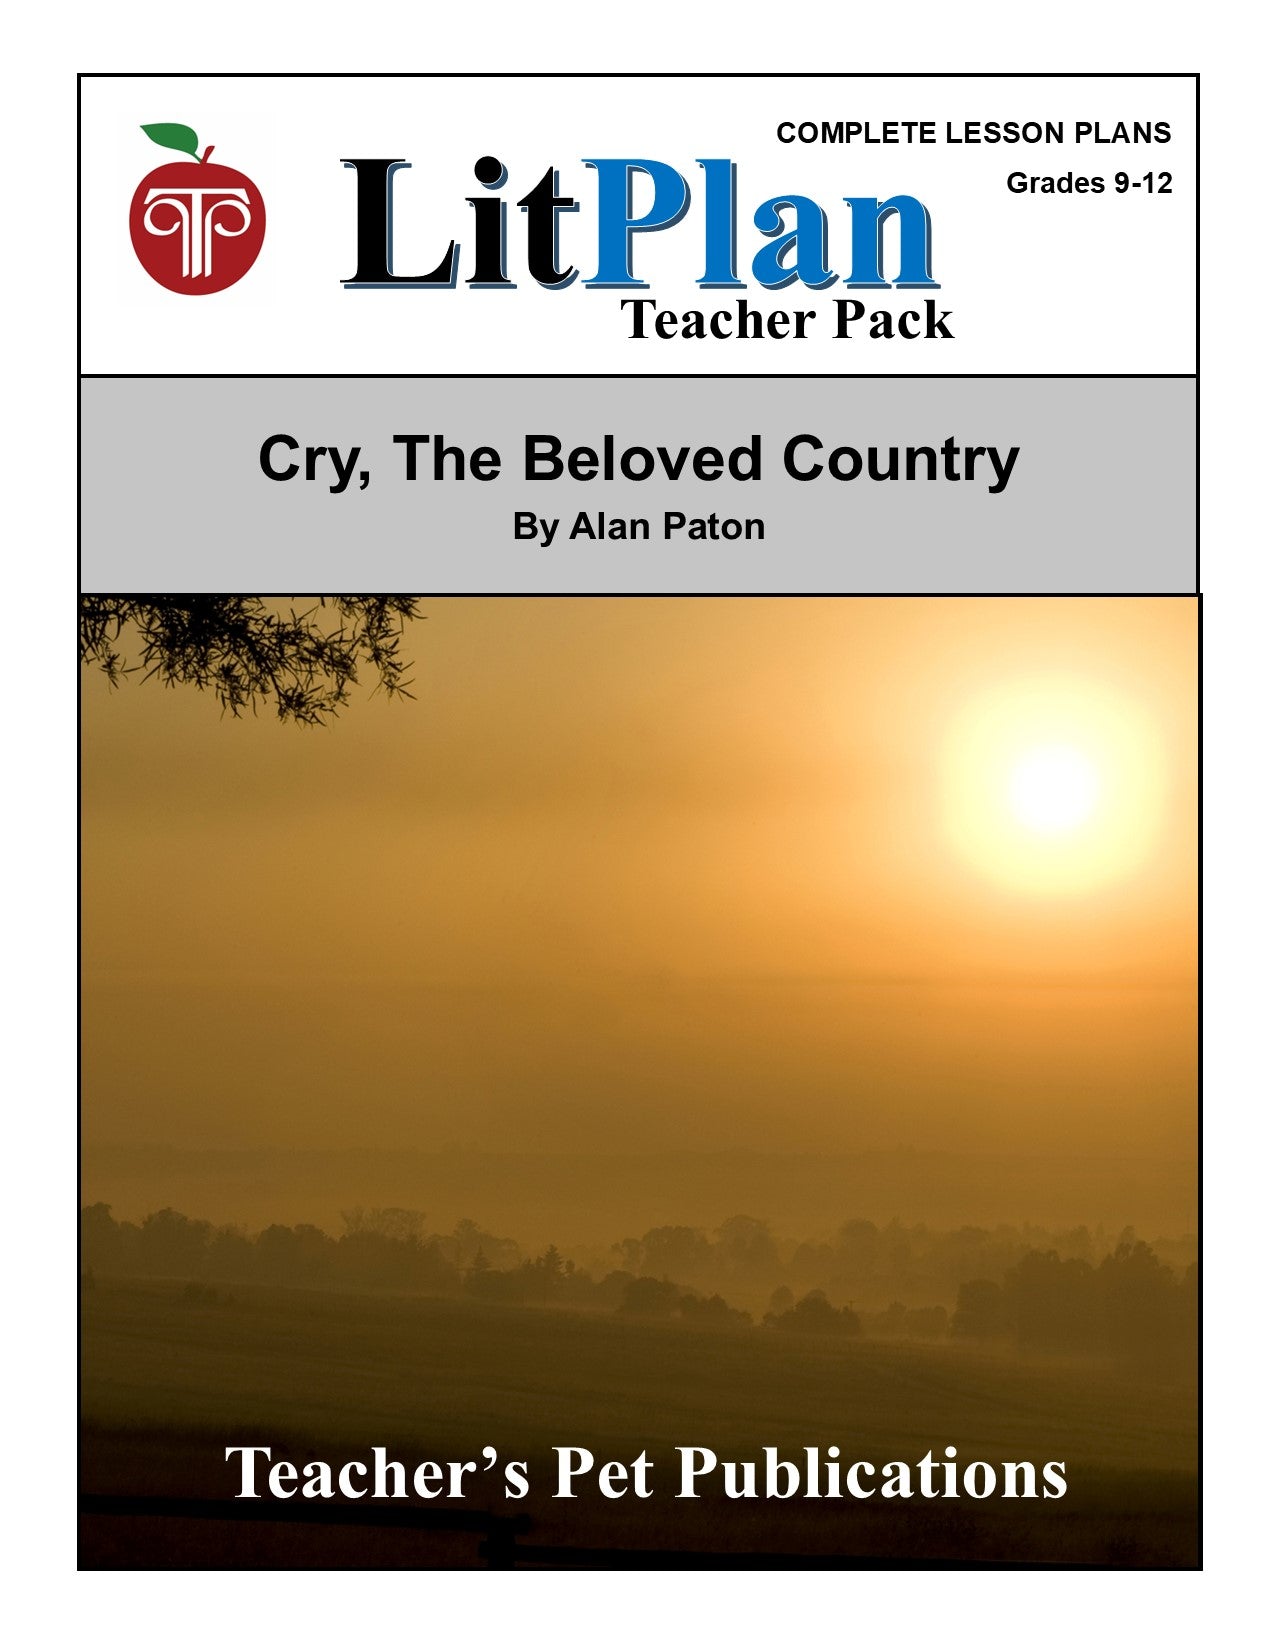 Cry, The Beloved Country: LitPlan Teacher Pack Grades 9-12